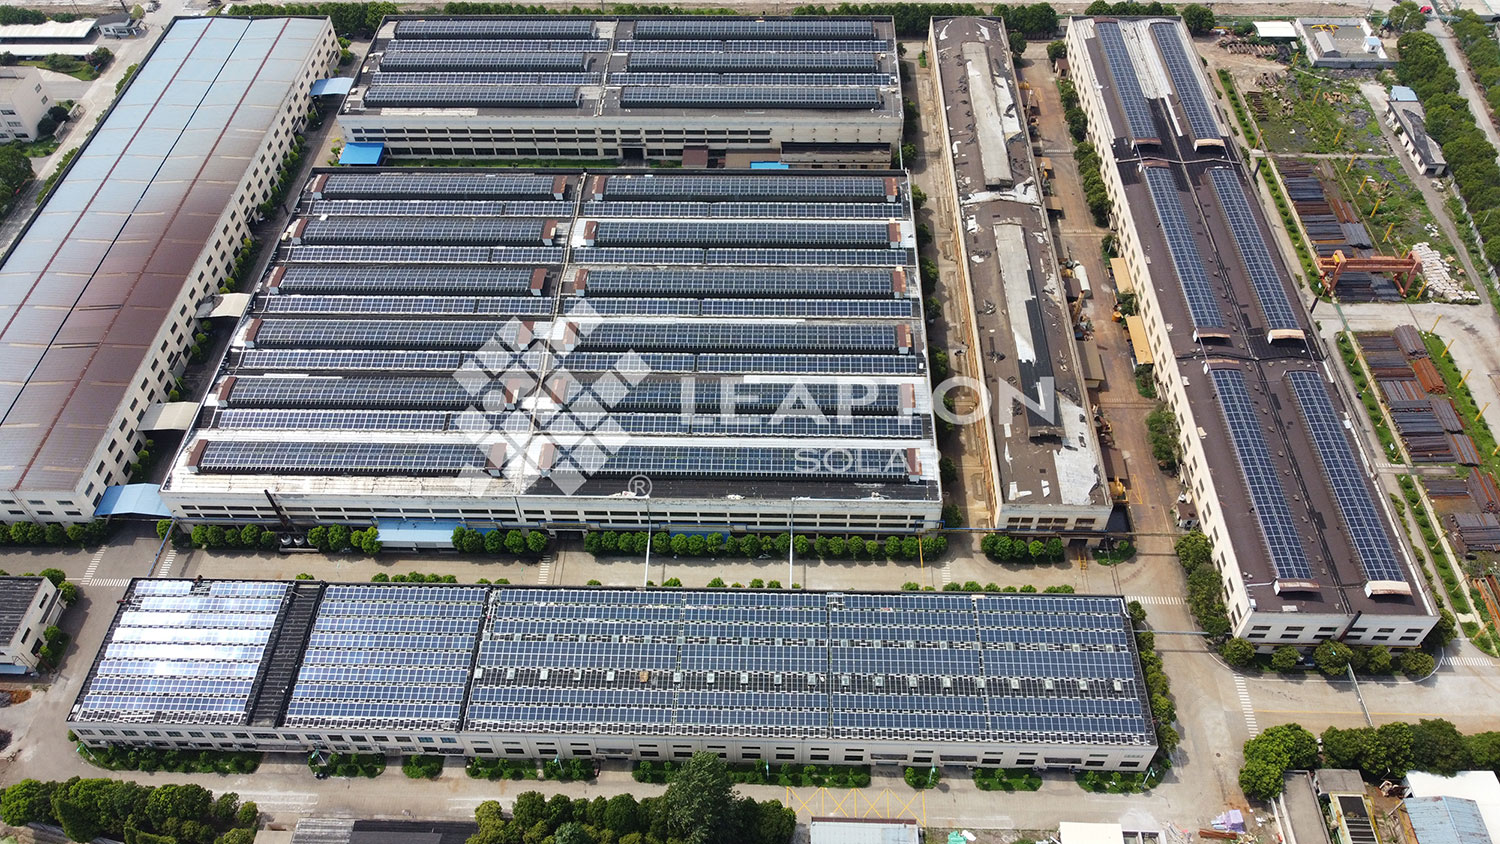 Leapton completed a 3.1MW of rooftop soalr project in China